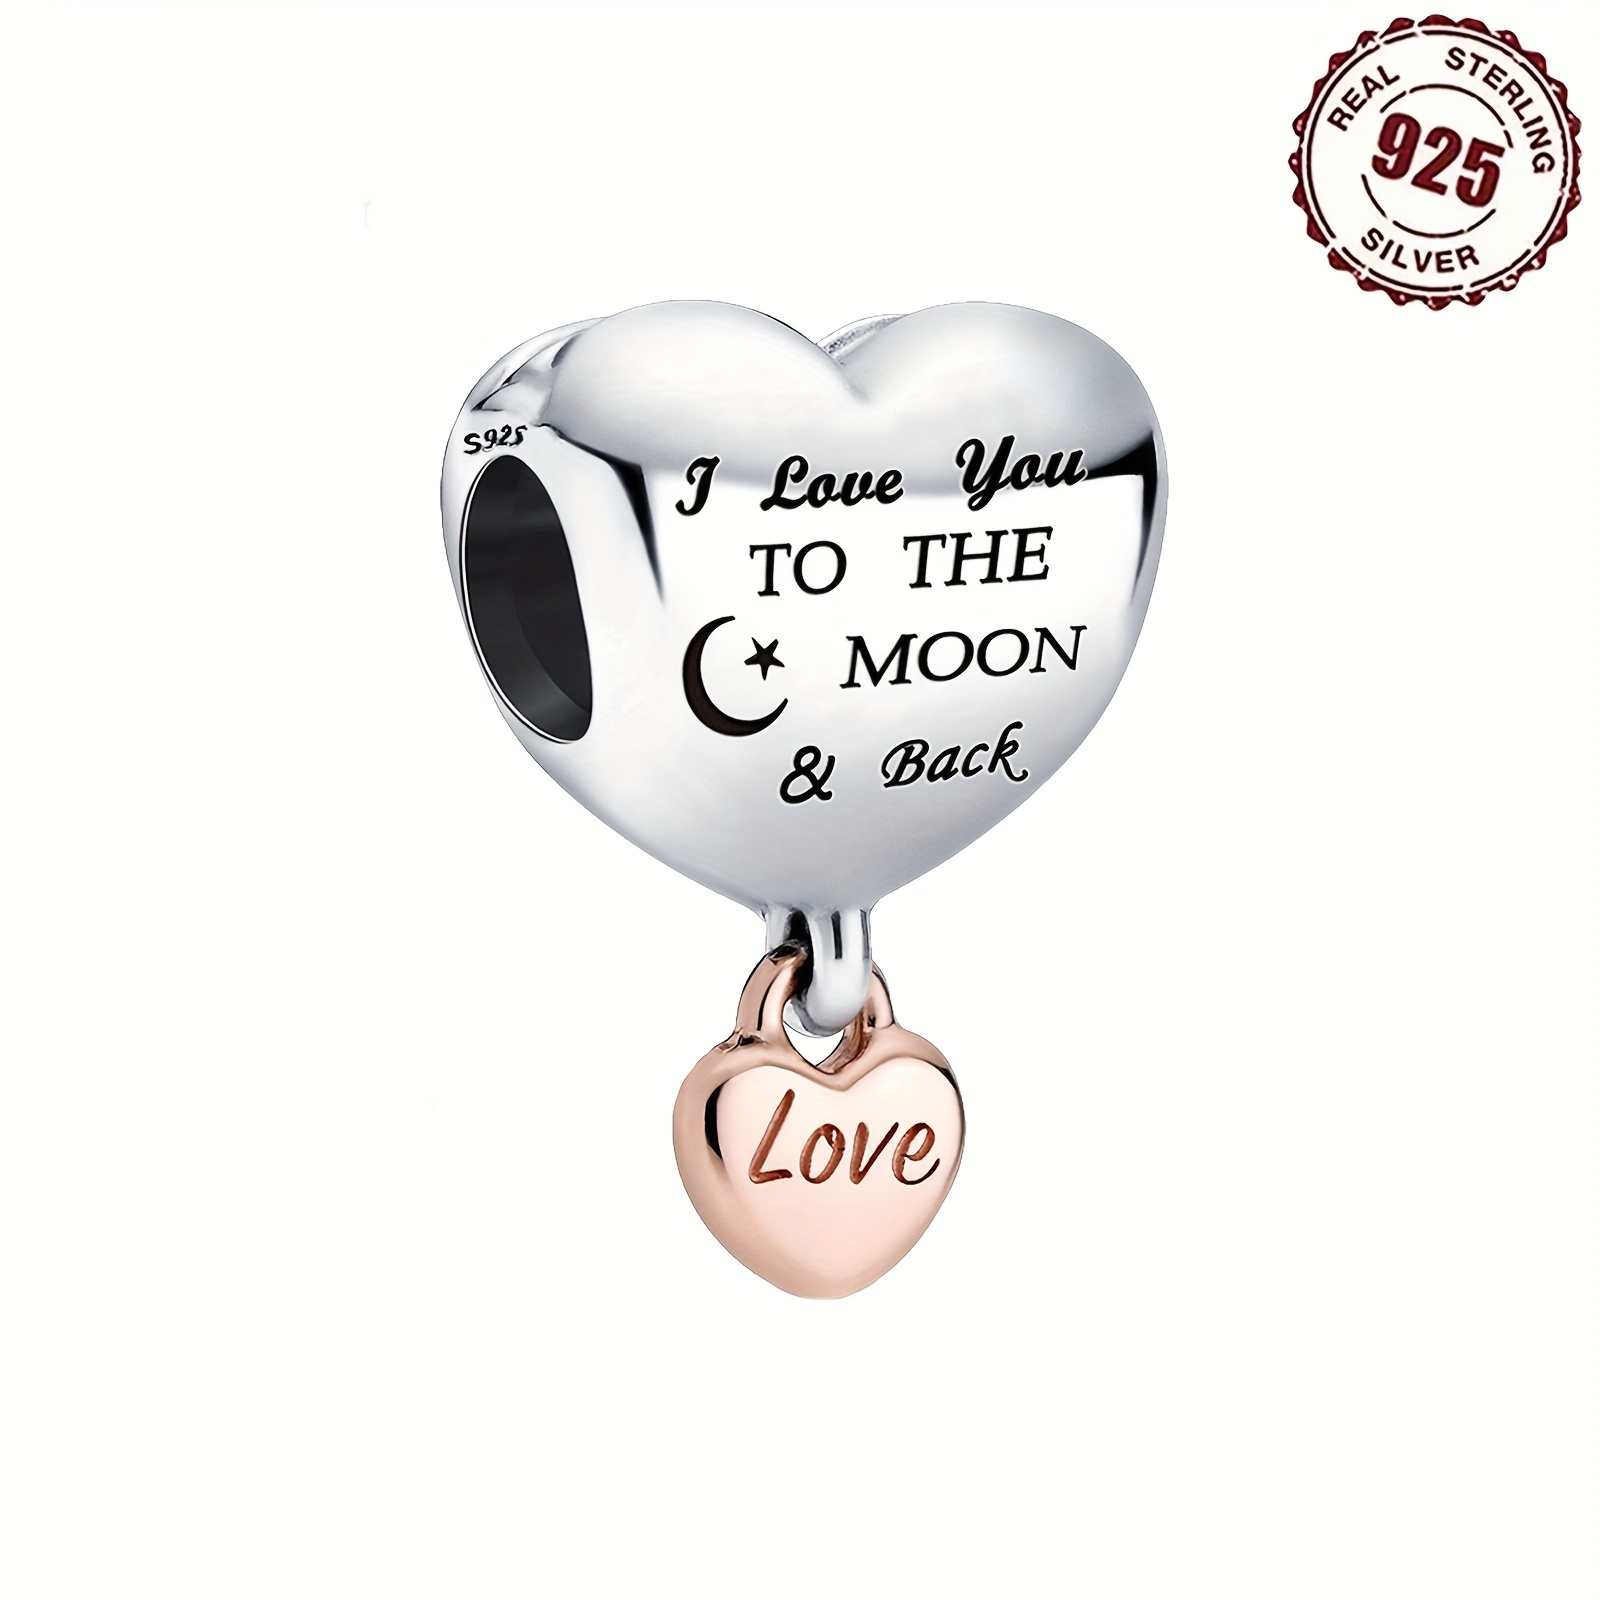 James Avery Artisan Jewelry - The new Changeable Charm Holder